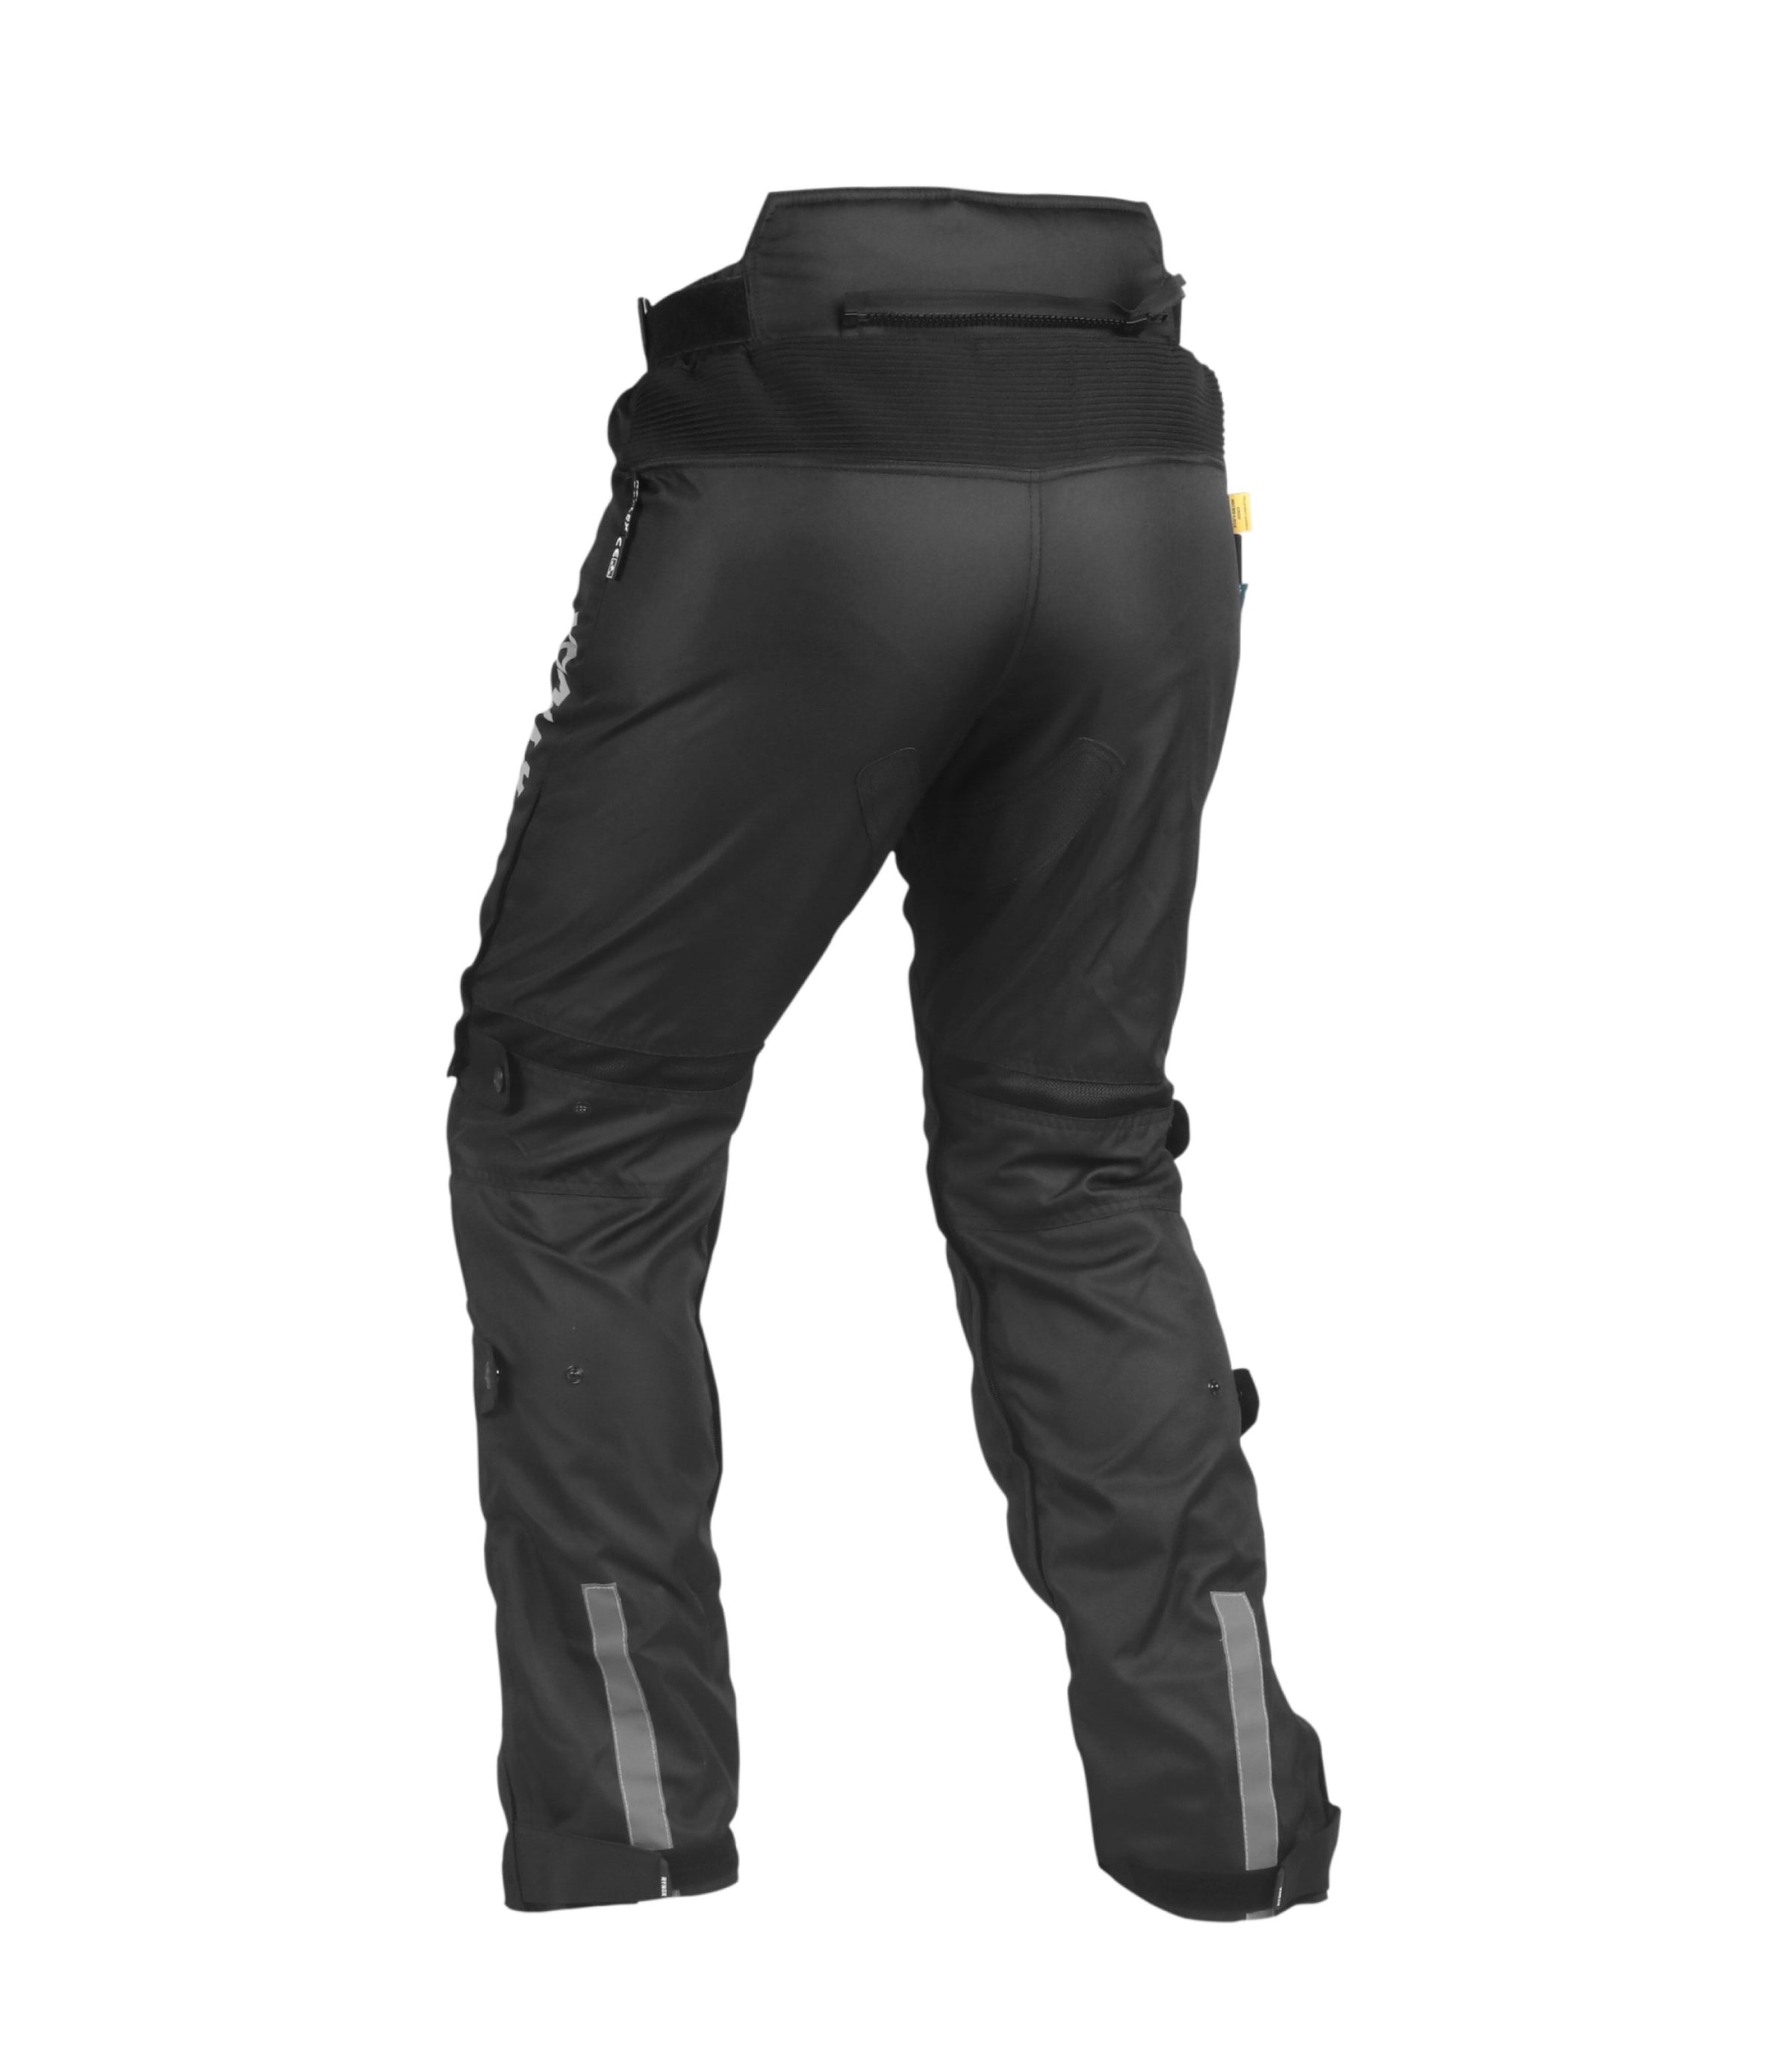 RYNOX Gears - AirTEX Riding Pants - The All Season Armoured Riding Pants  with Knox Knee+Shin Protector from RYNOX Gears​ See more details here:  bit.ly/RynoxGearsAirTEX AirTEX riding pant takes comfort and air